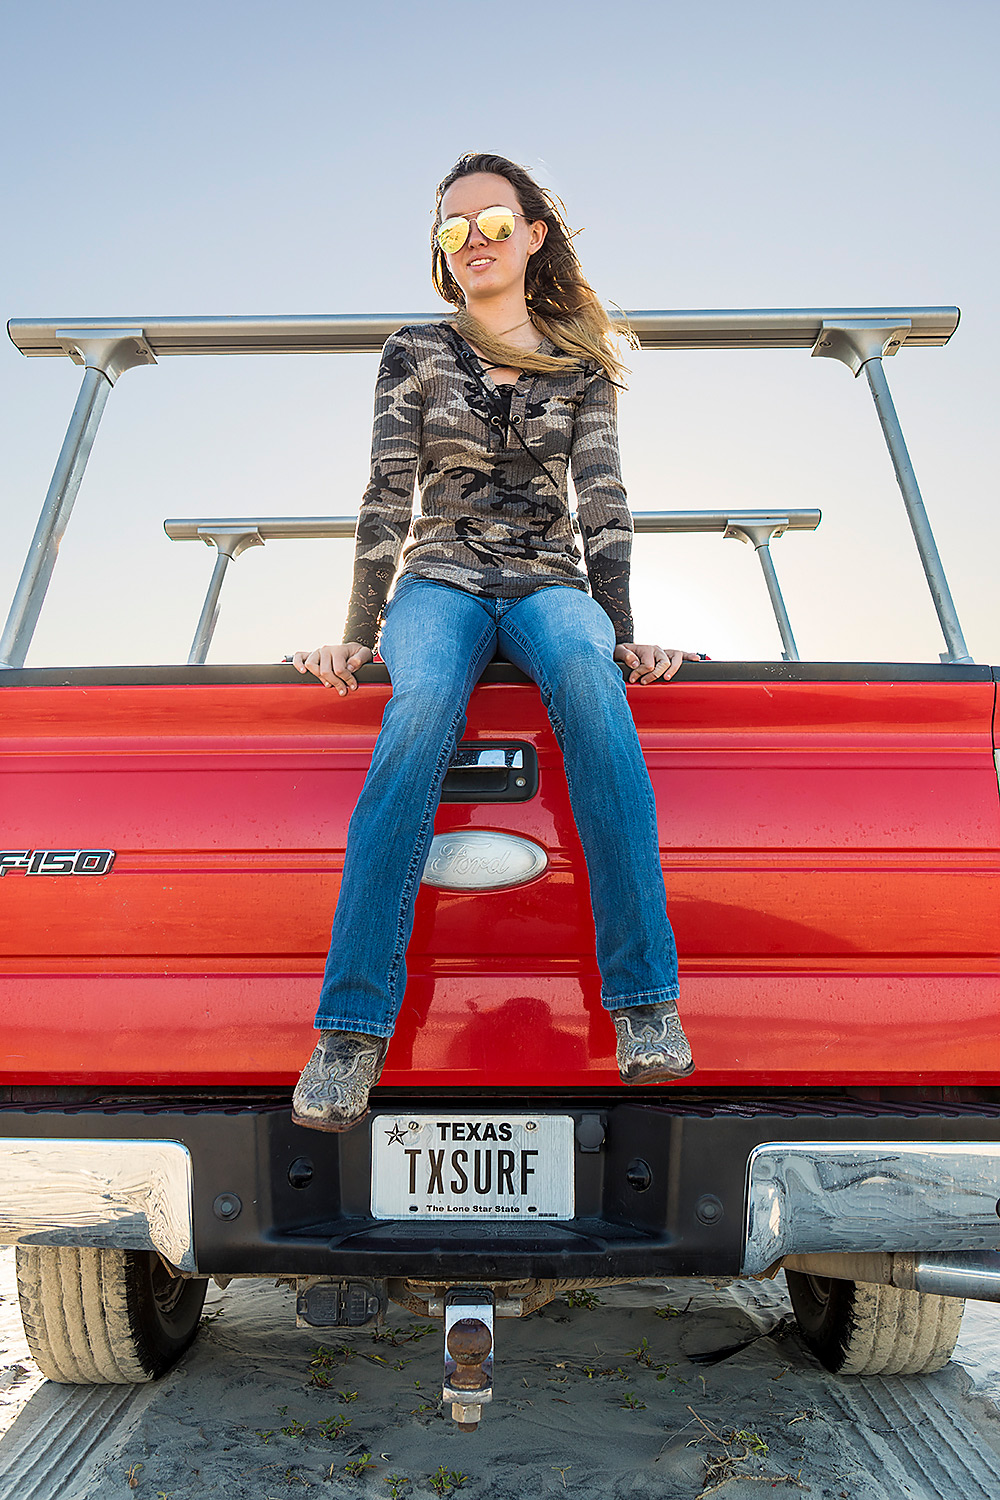 Texas surfer girl on tailgate of red Ford truck